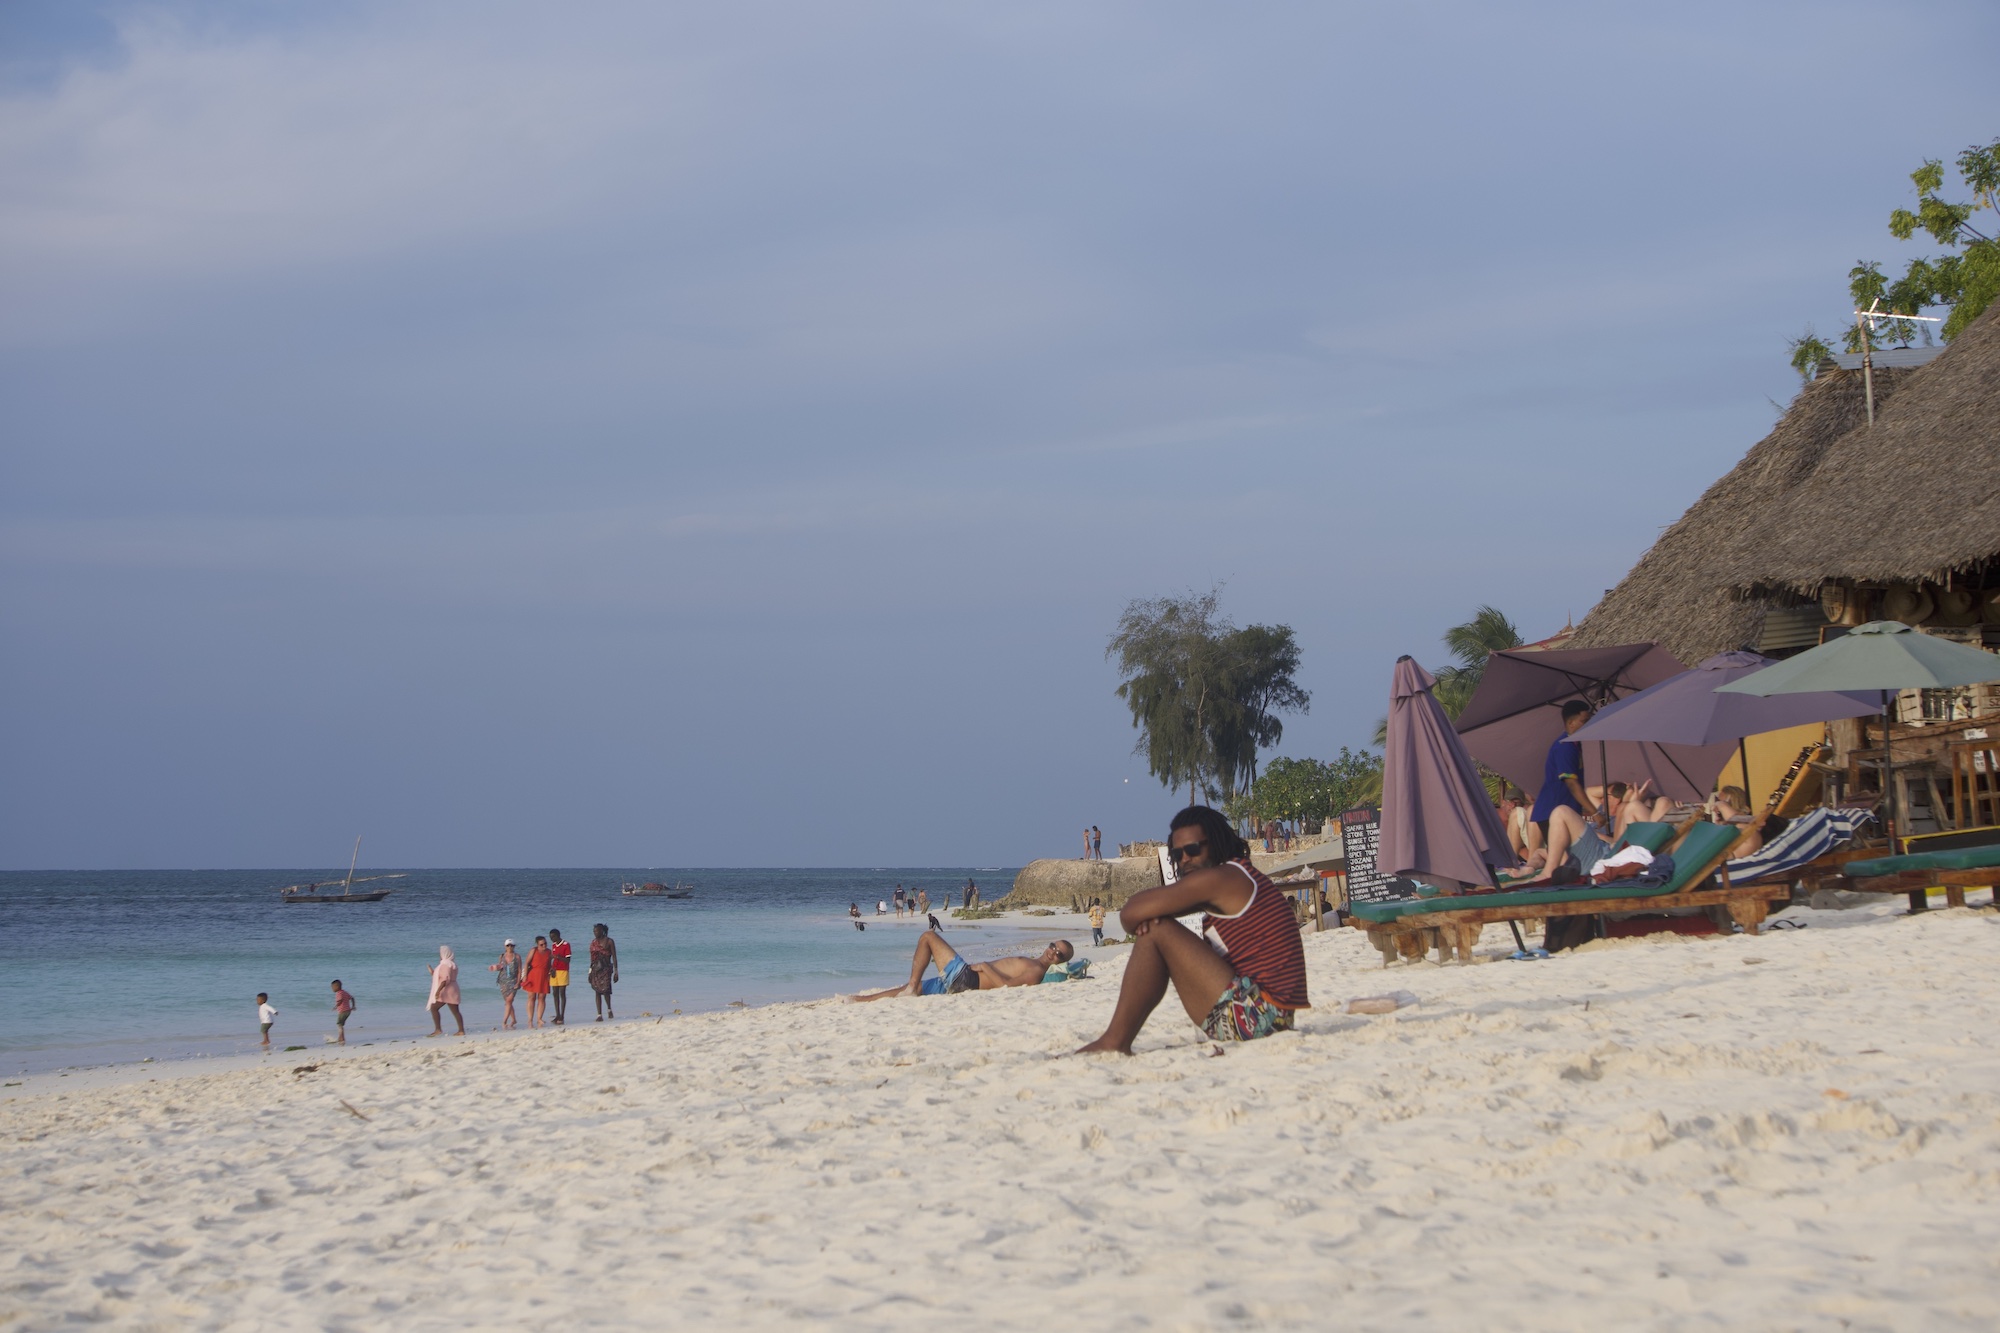 A view of Nungwi beach and people enjoying at the beach